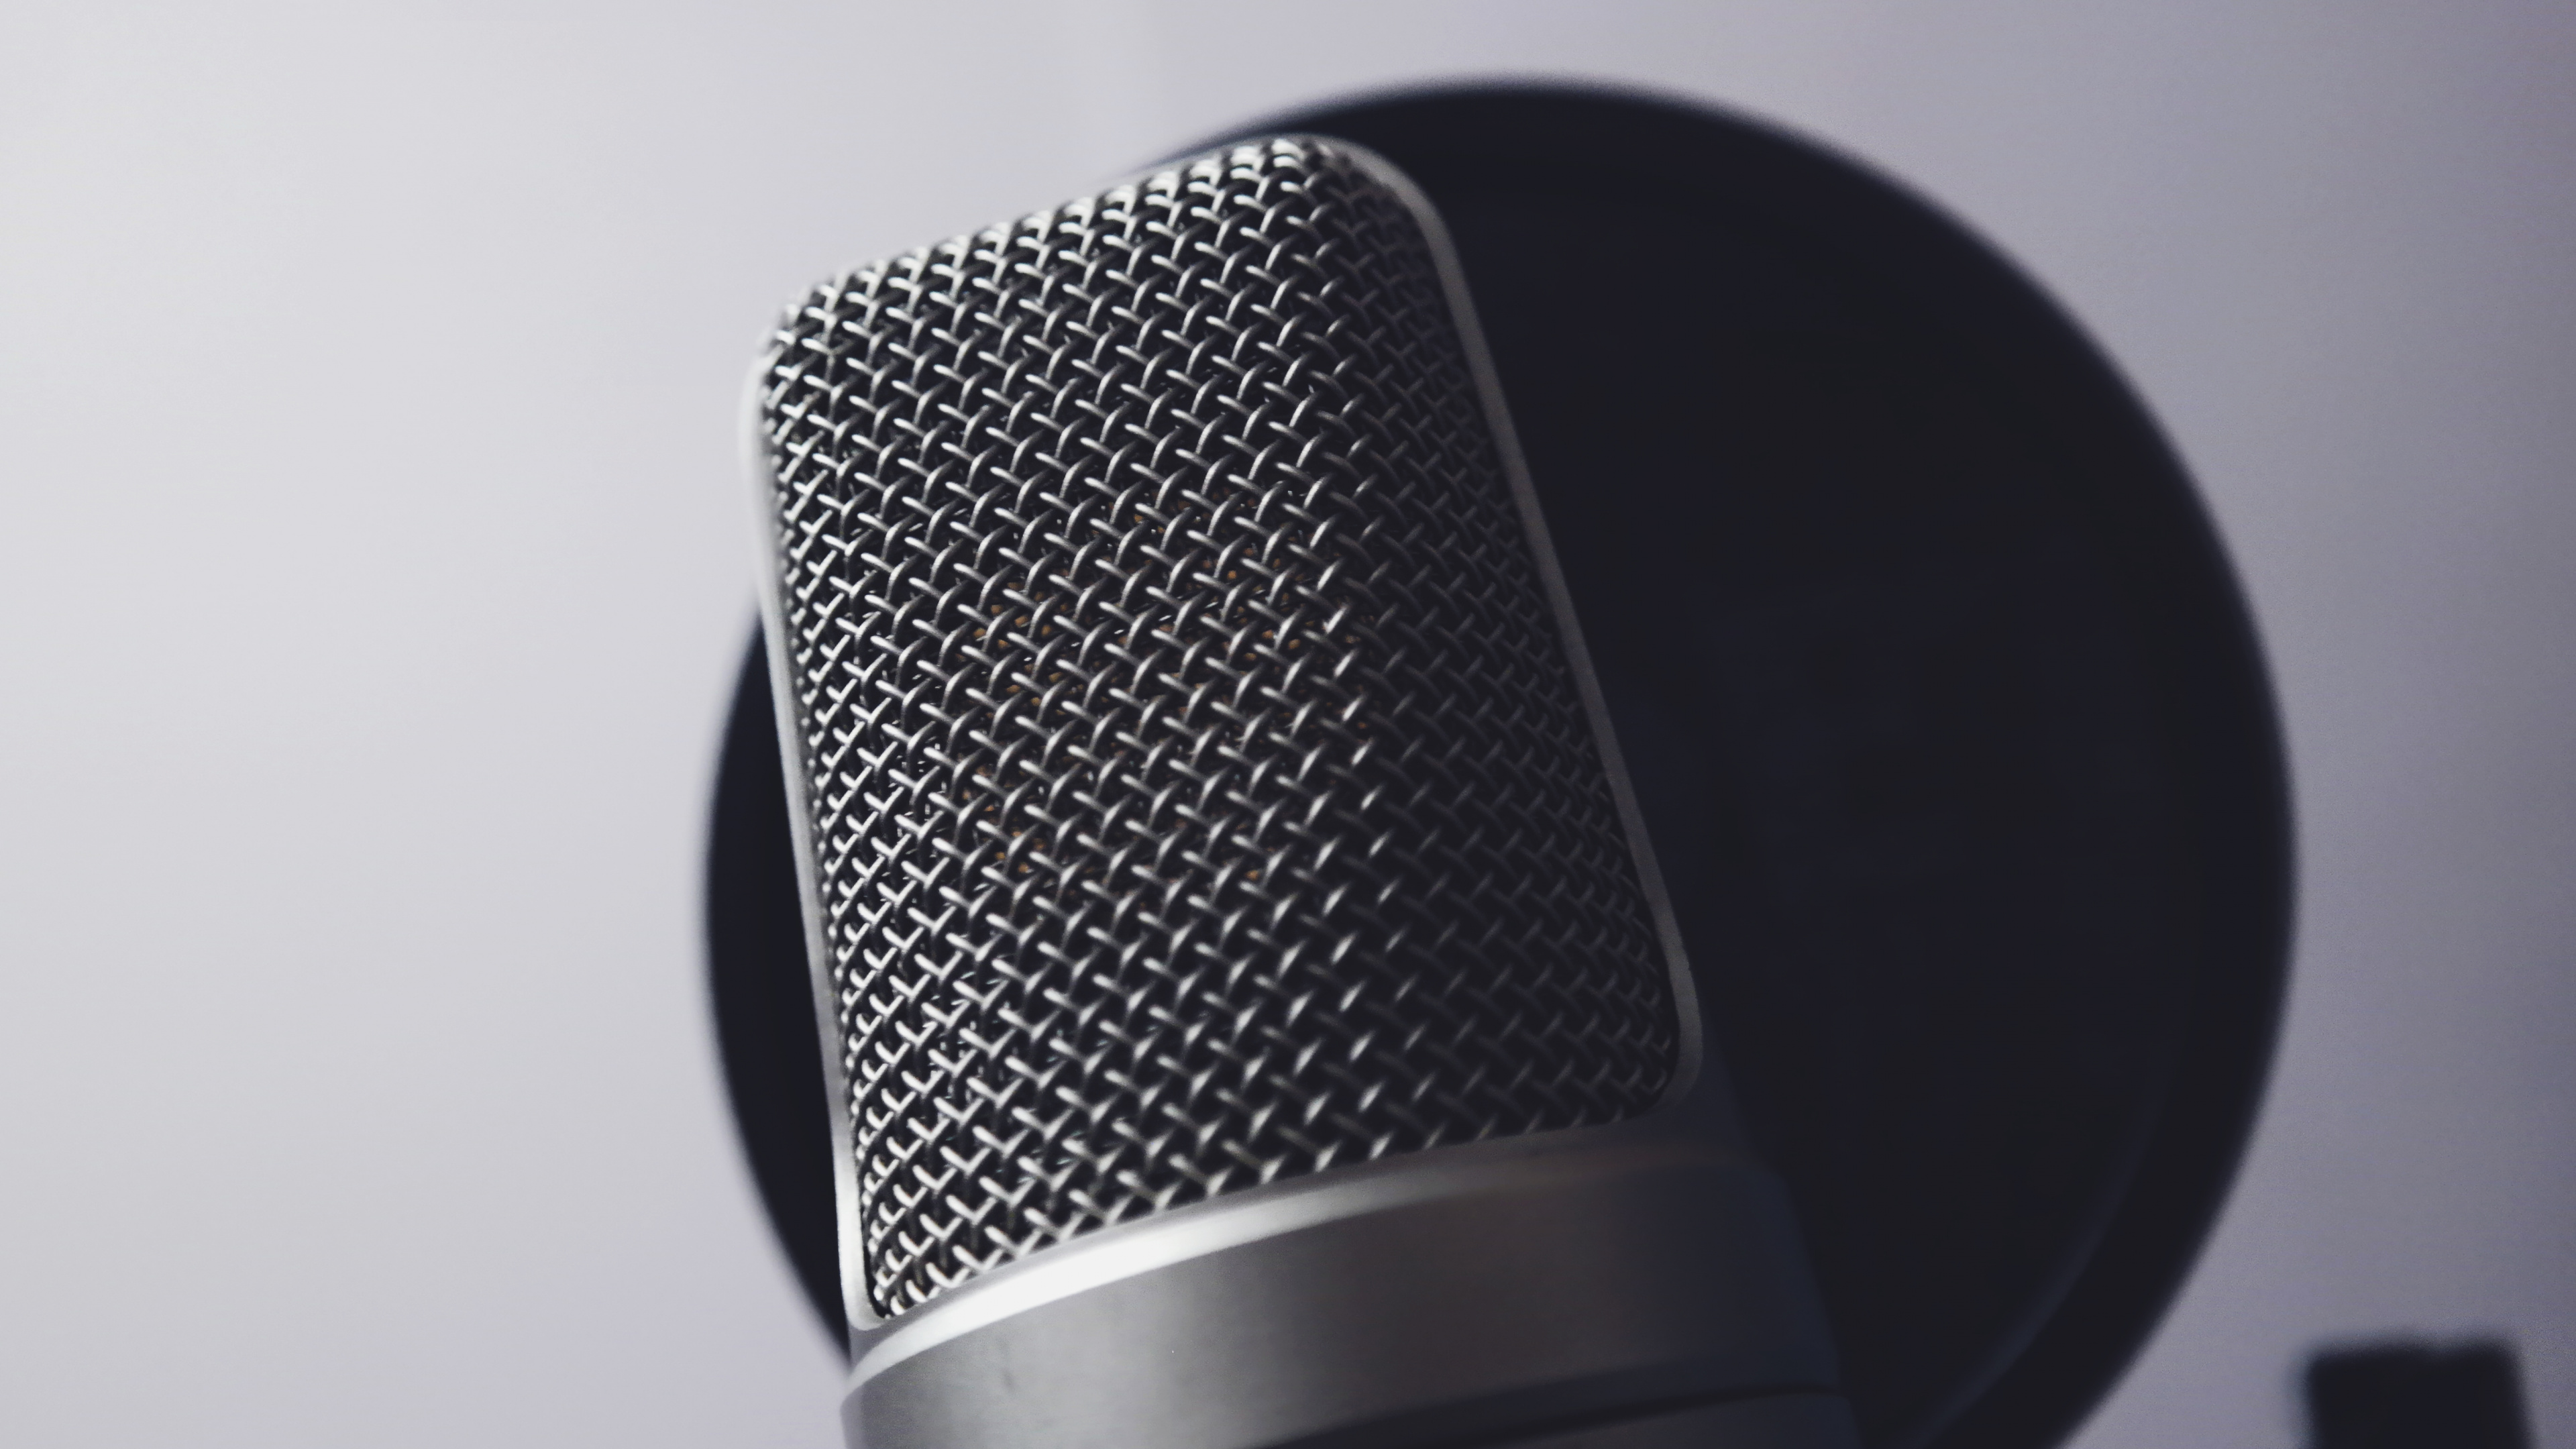 Microphone, Microphone Stand, Sound Recording and Reproduction, Recording Studio, Recording. Wallpaper in 3840x2160 Resolution